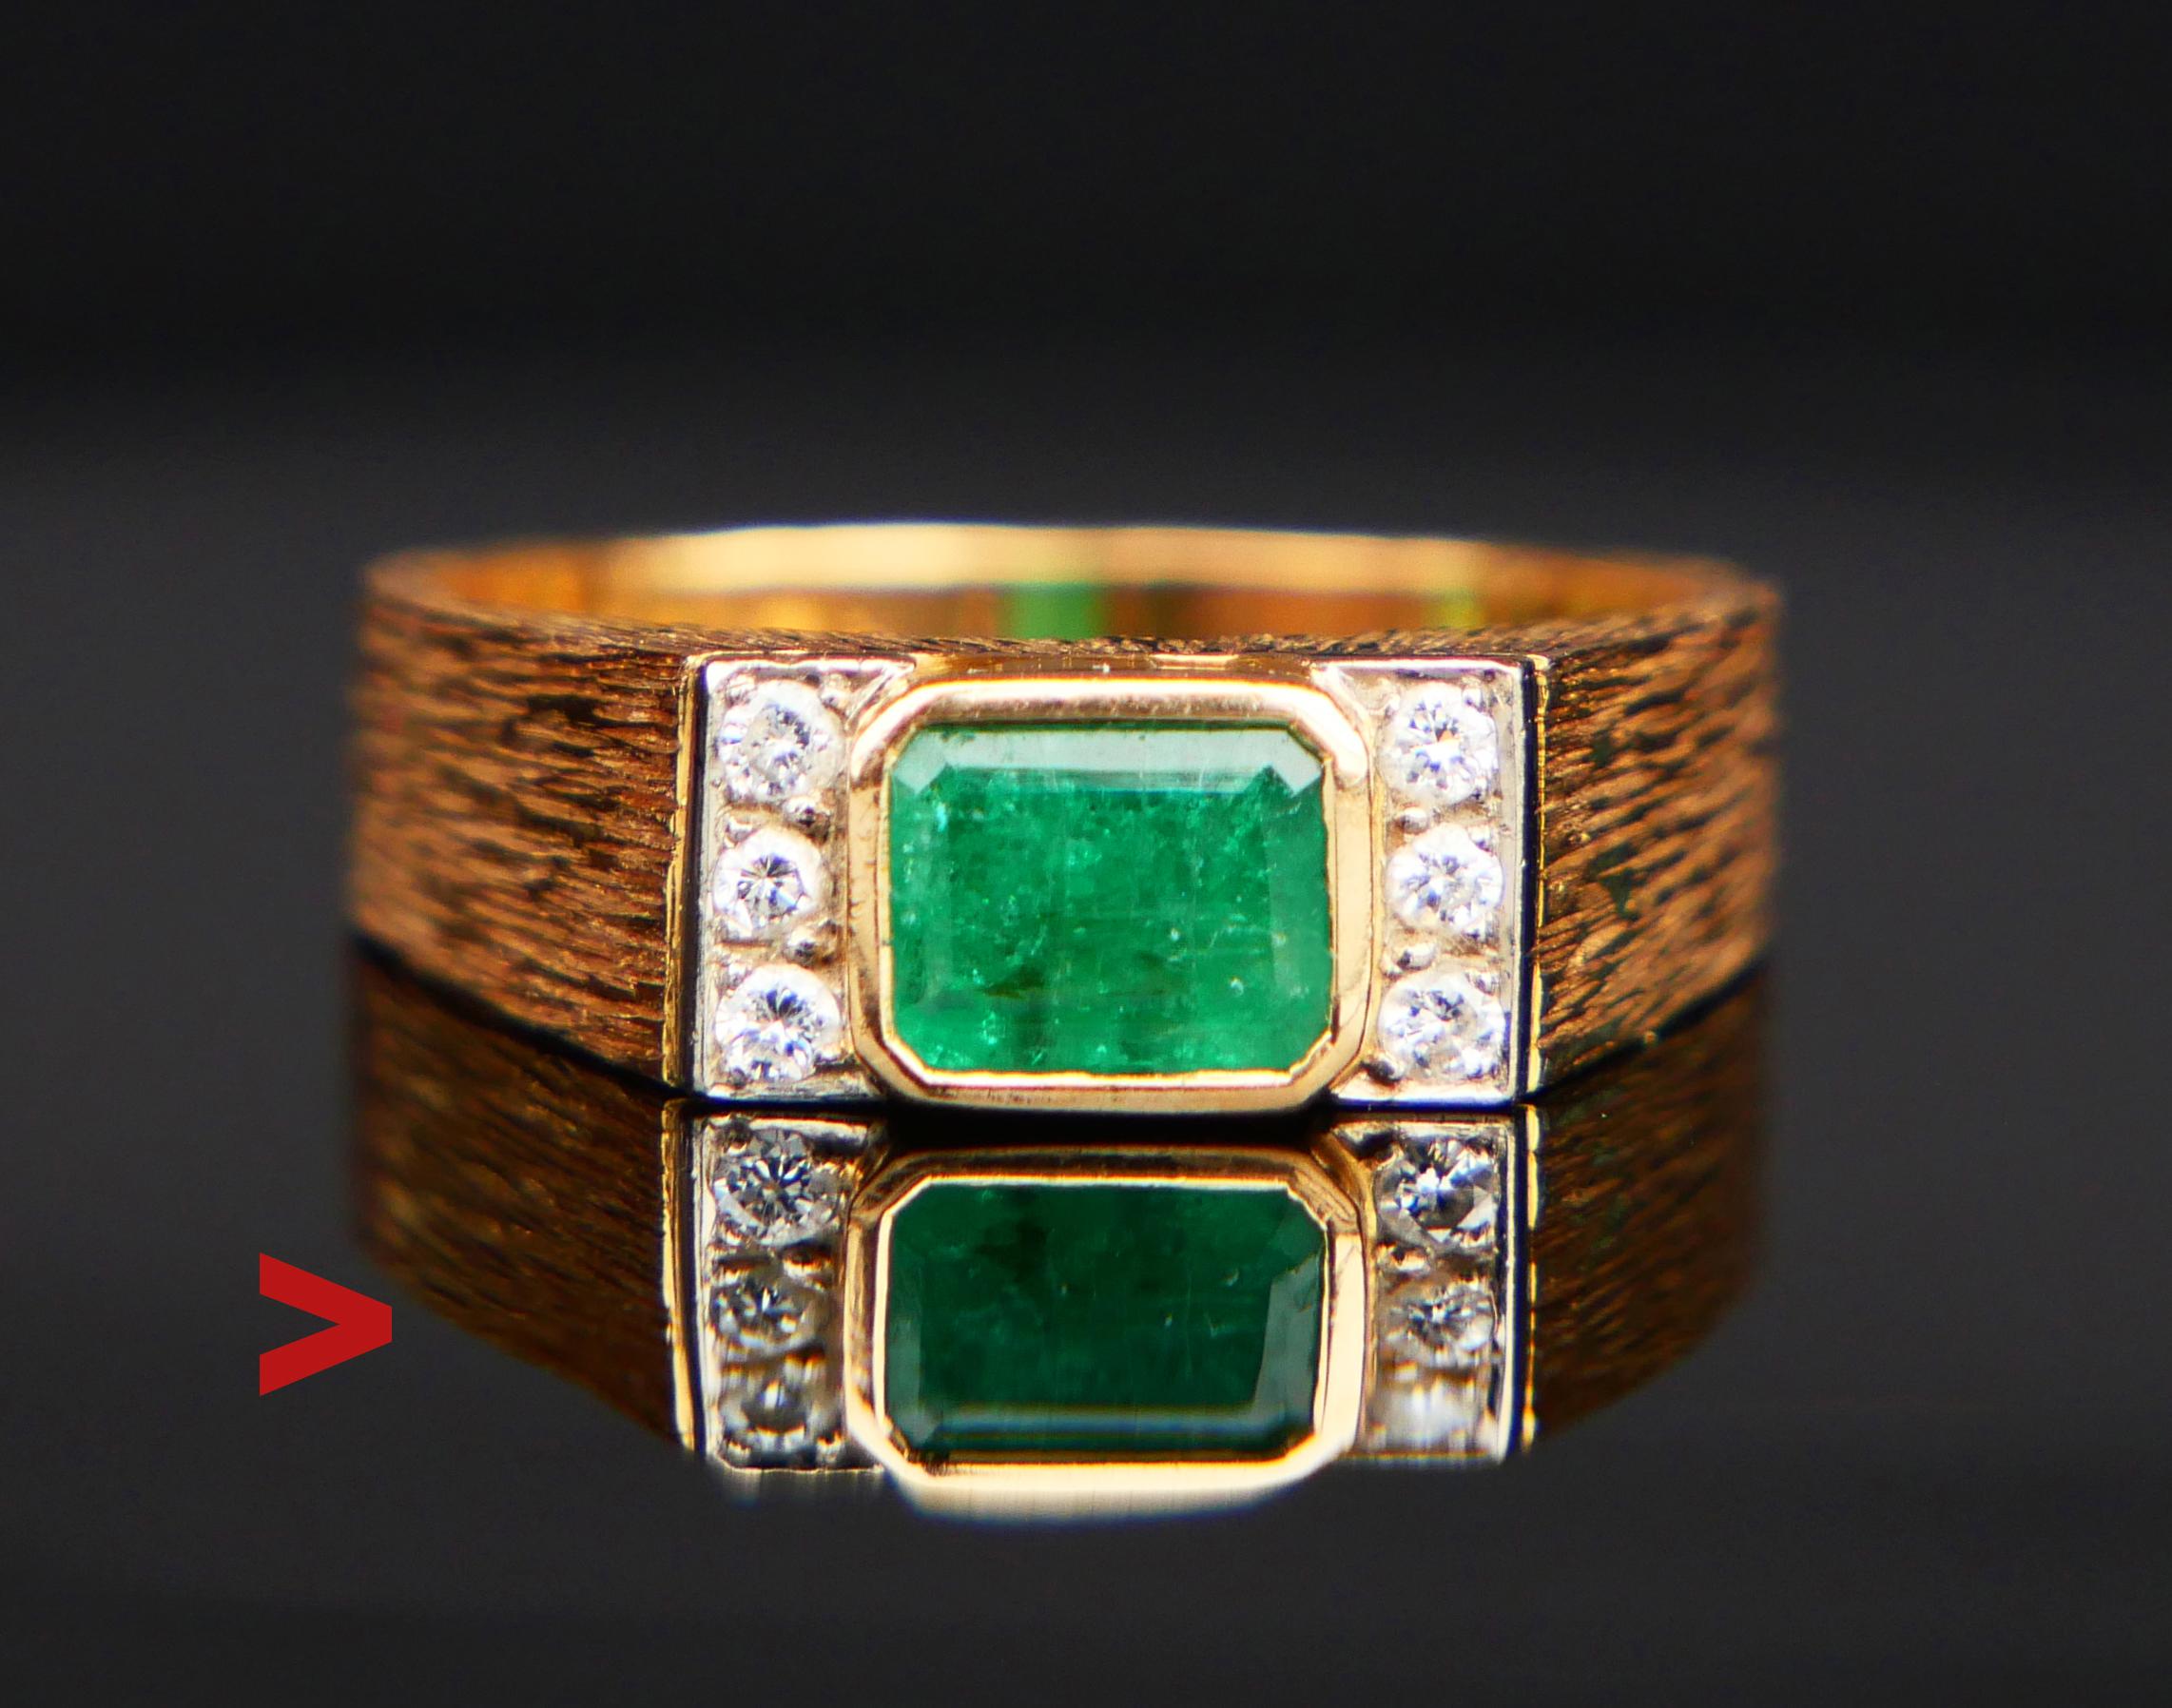 
Vintage Emerald and Diamonds Ring. 18K Yellow White Gold. Swedish hallmarks of maker, date code is C10 / made in 1976. Stamped in Swedish 